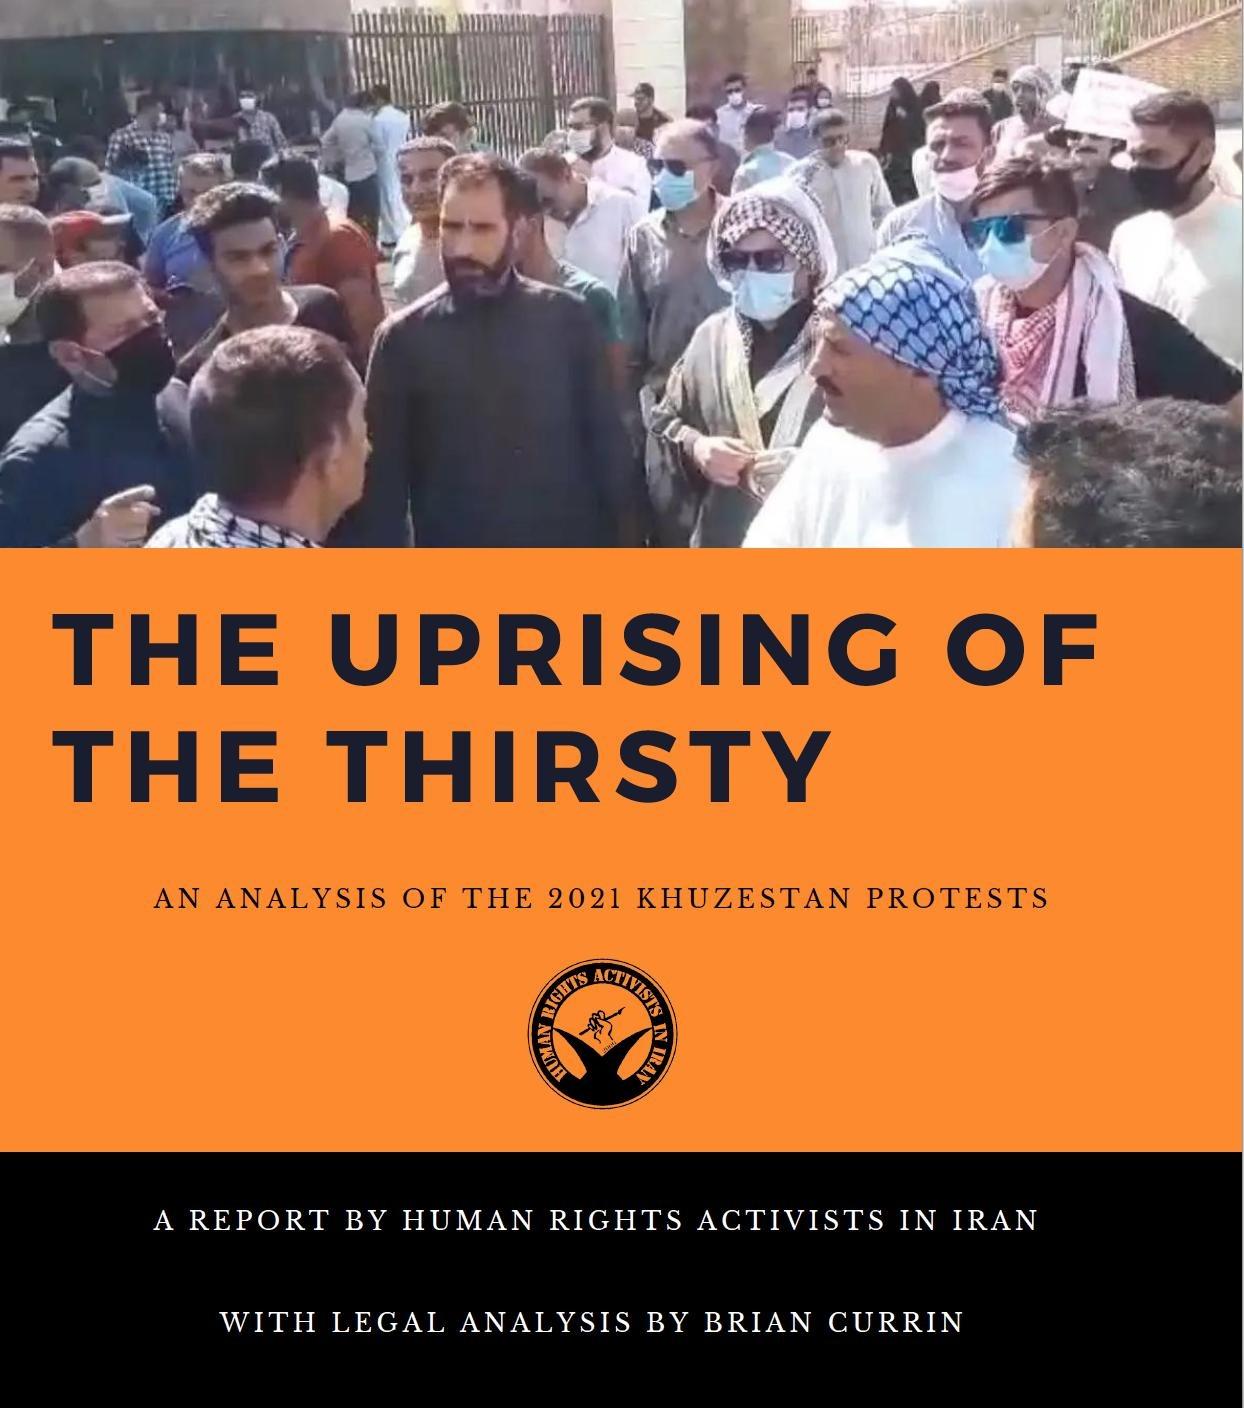 The uprising of the thirsty; An analysis of the 2021 Khuzestan Protests